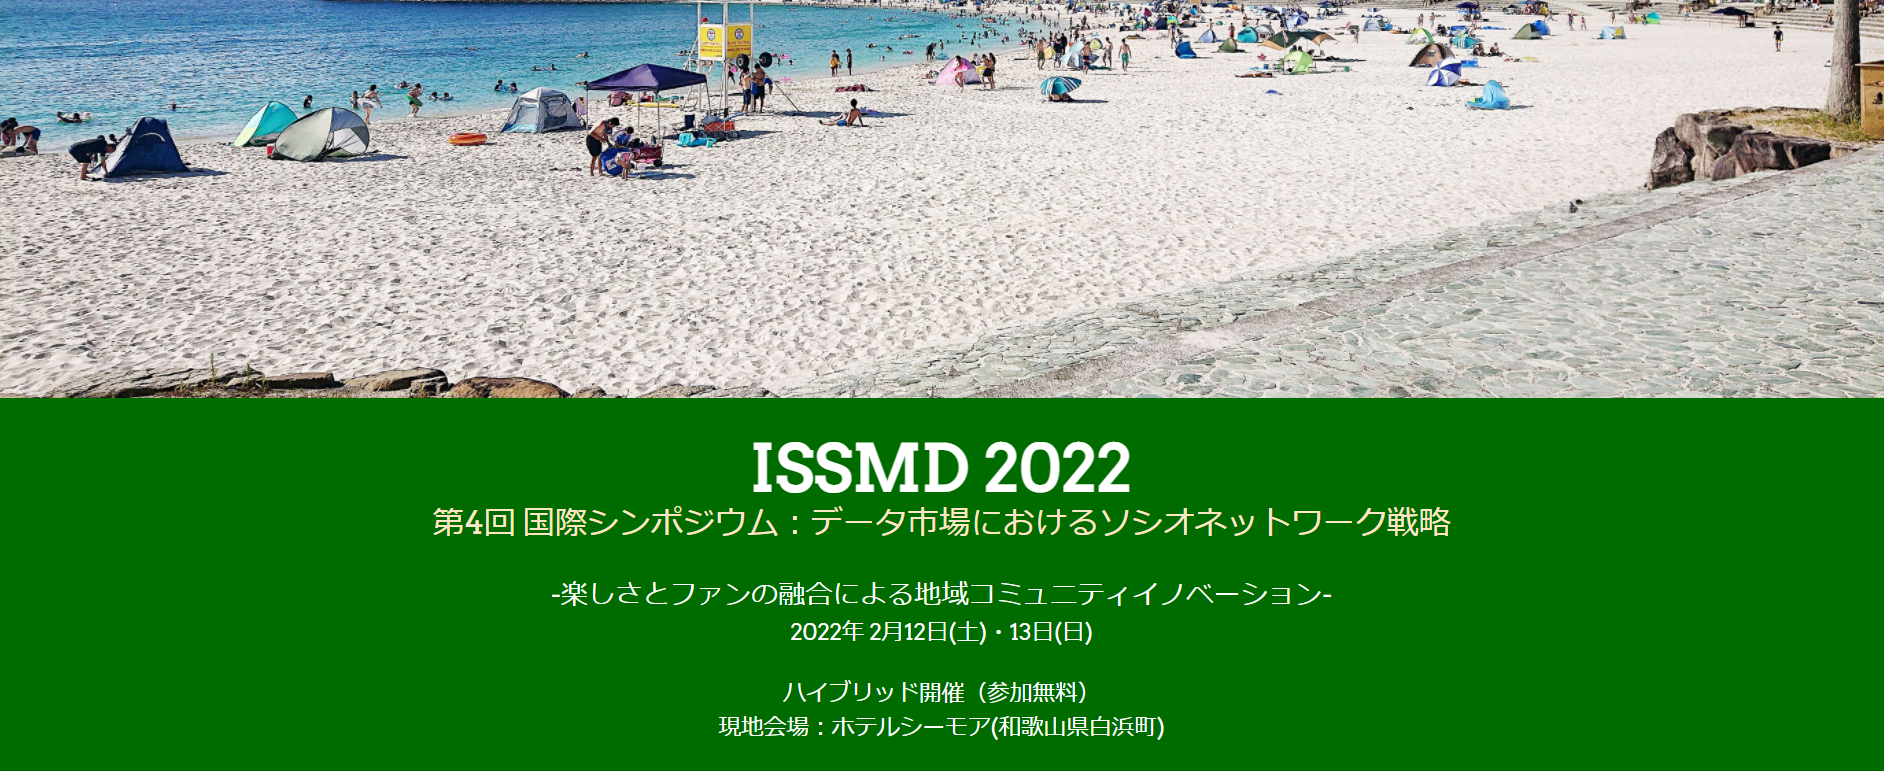 ISSMD2022.png